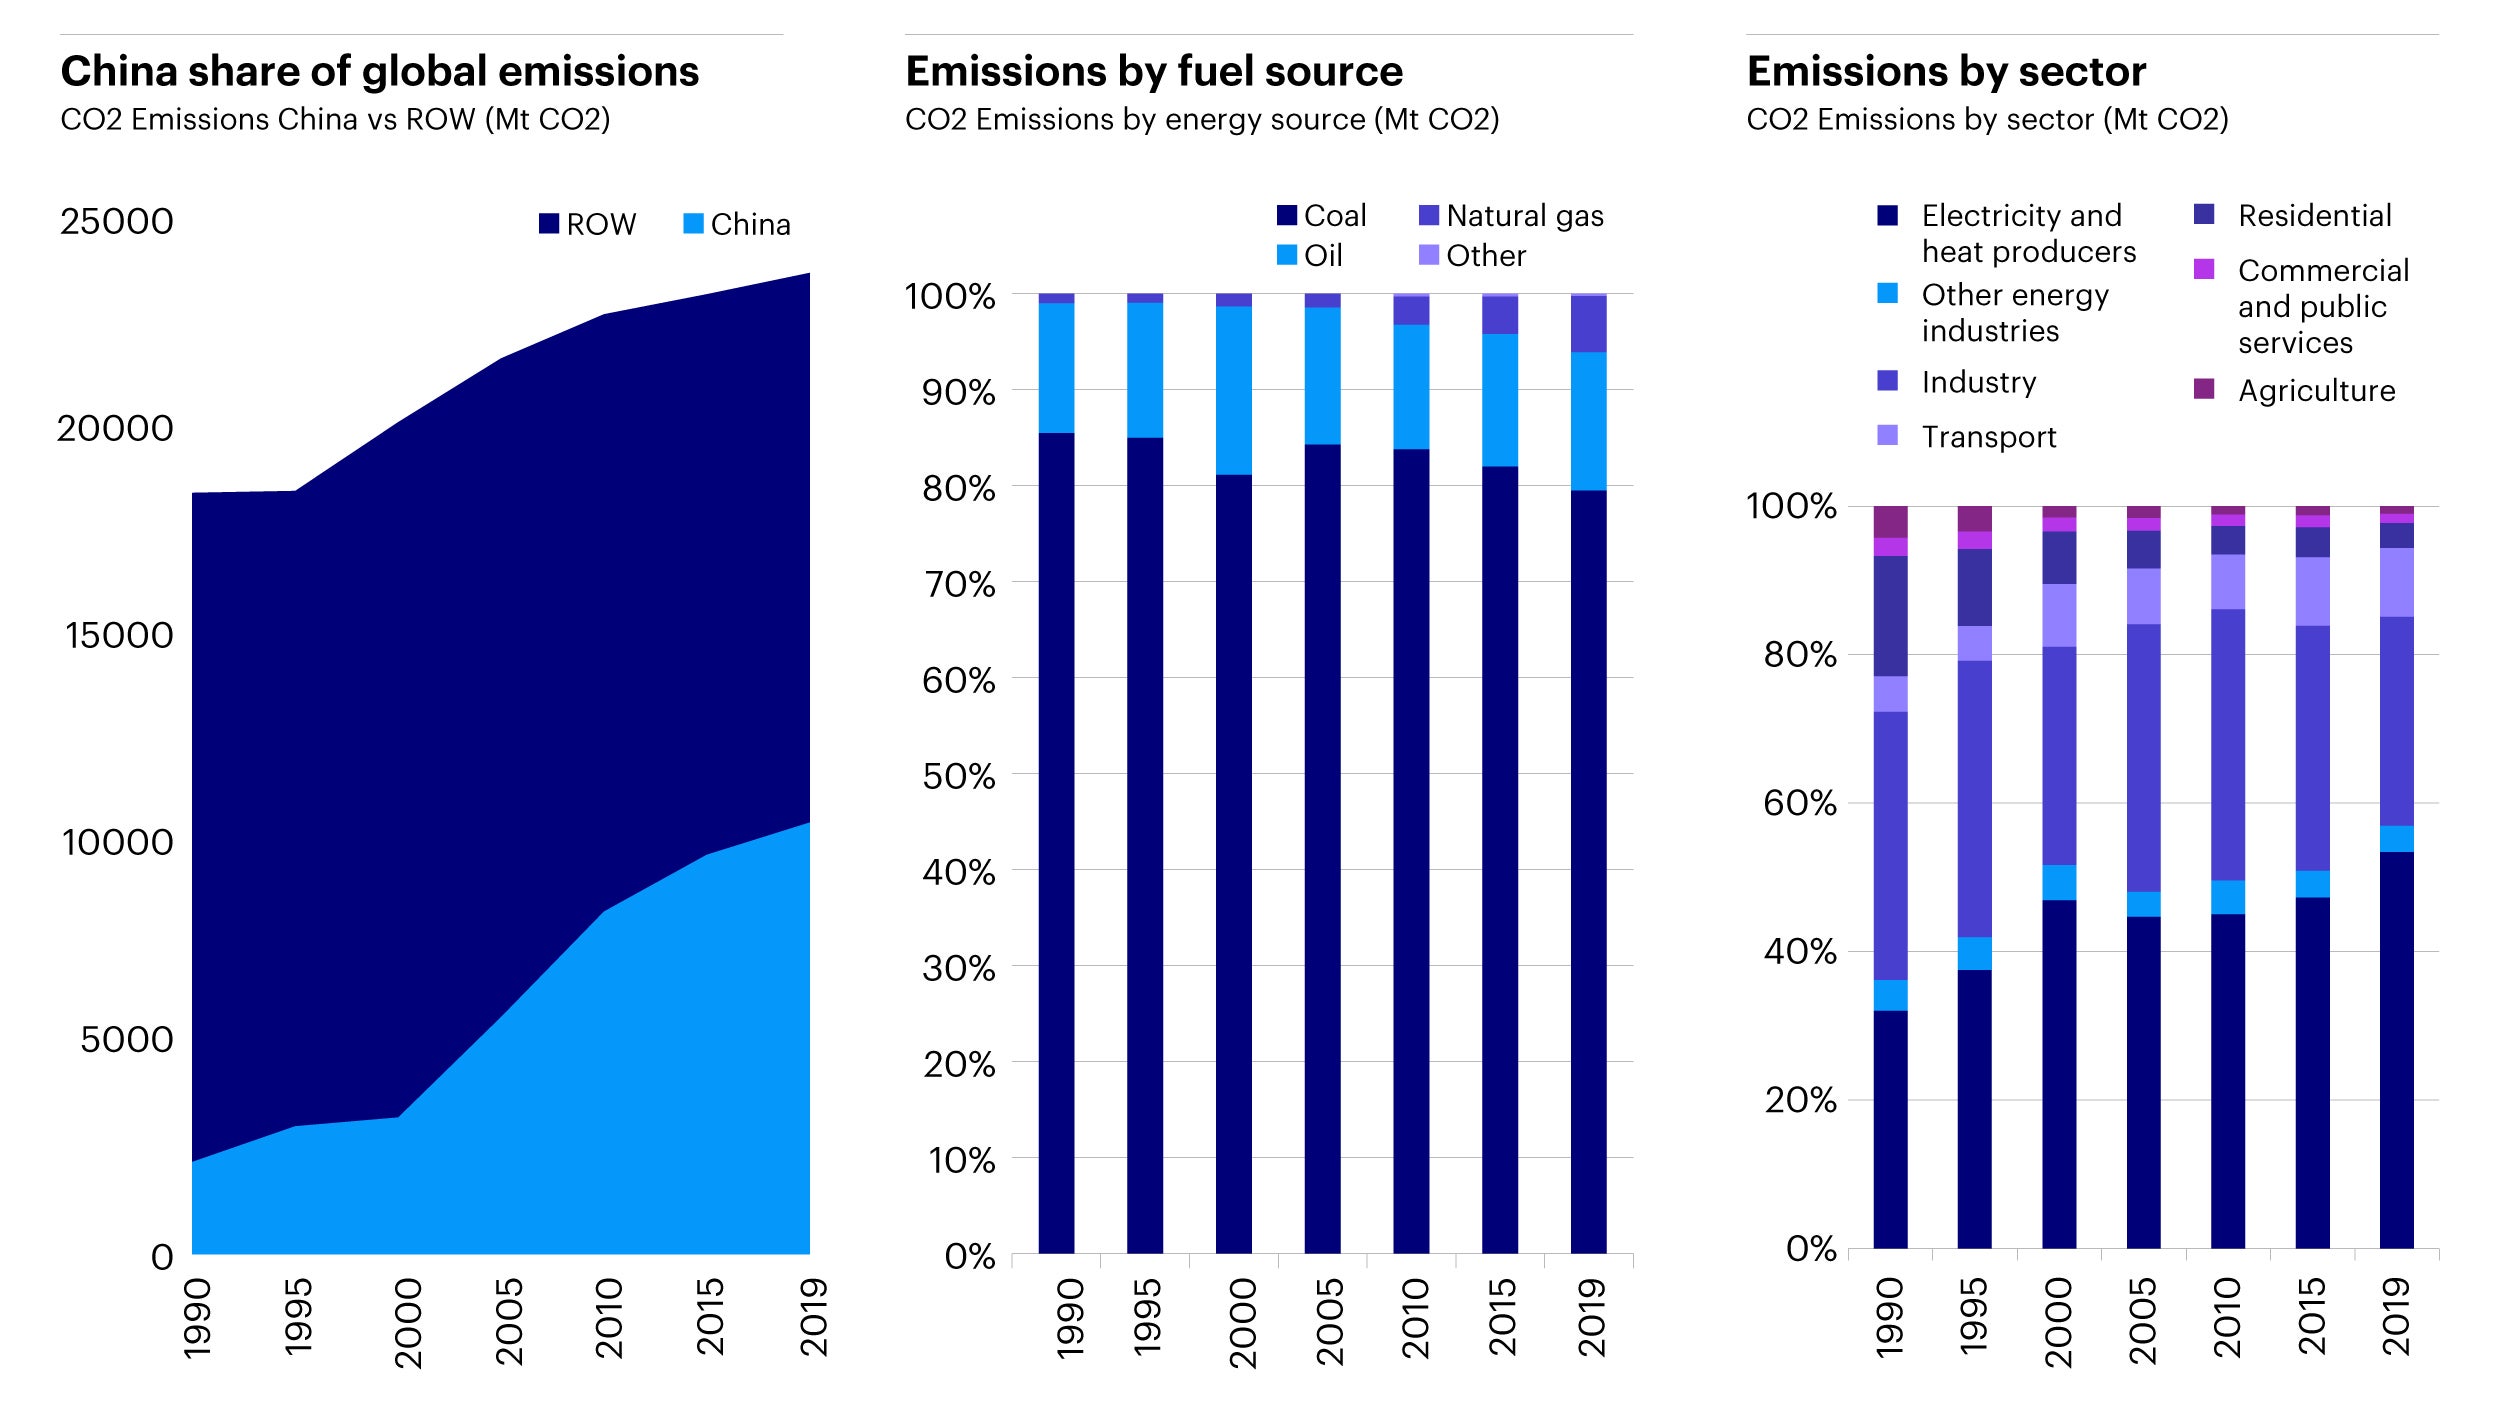 Figure 1: China state of emissions: China takes up ~30% of global emissions; predominantly driven by coal as fuel source especially for electricity and industry purposes 